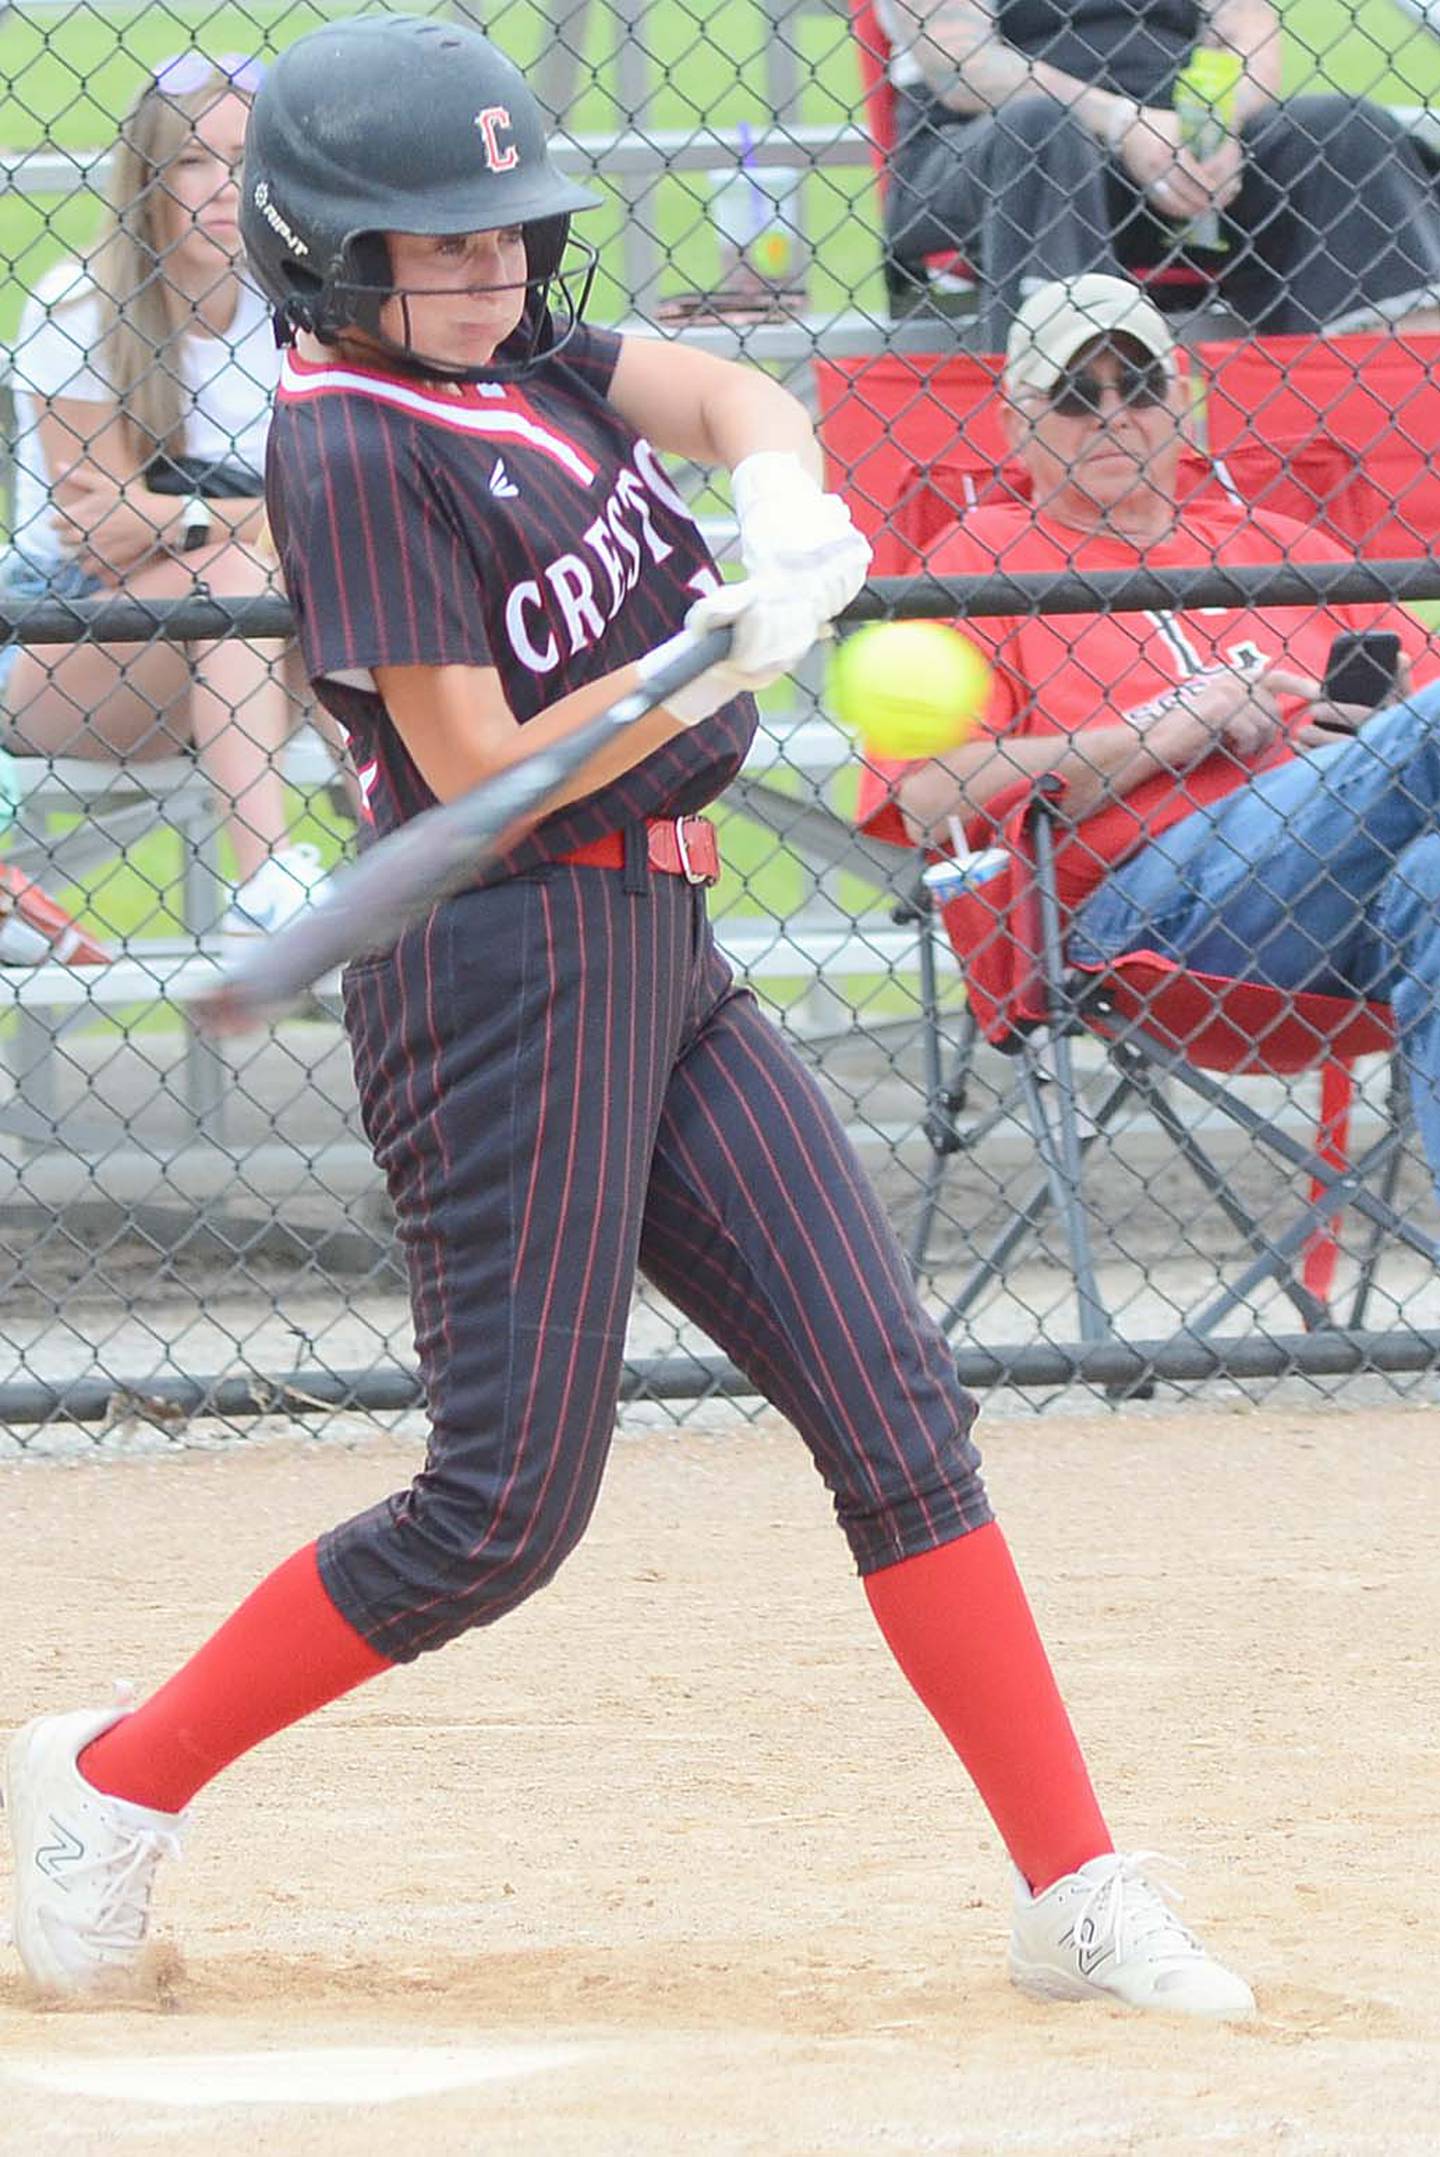 Creston right fielder Sasha Wurster connects with a pitch during Thursday's game against Glenwood. Wurster hit a two-run single and had two long flyouts to the warning track in the 11-1 victory.